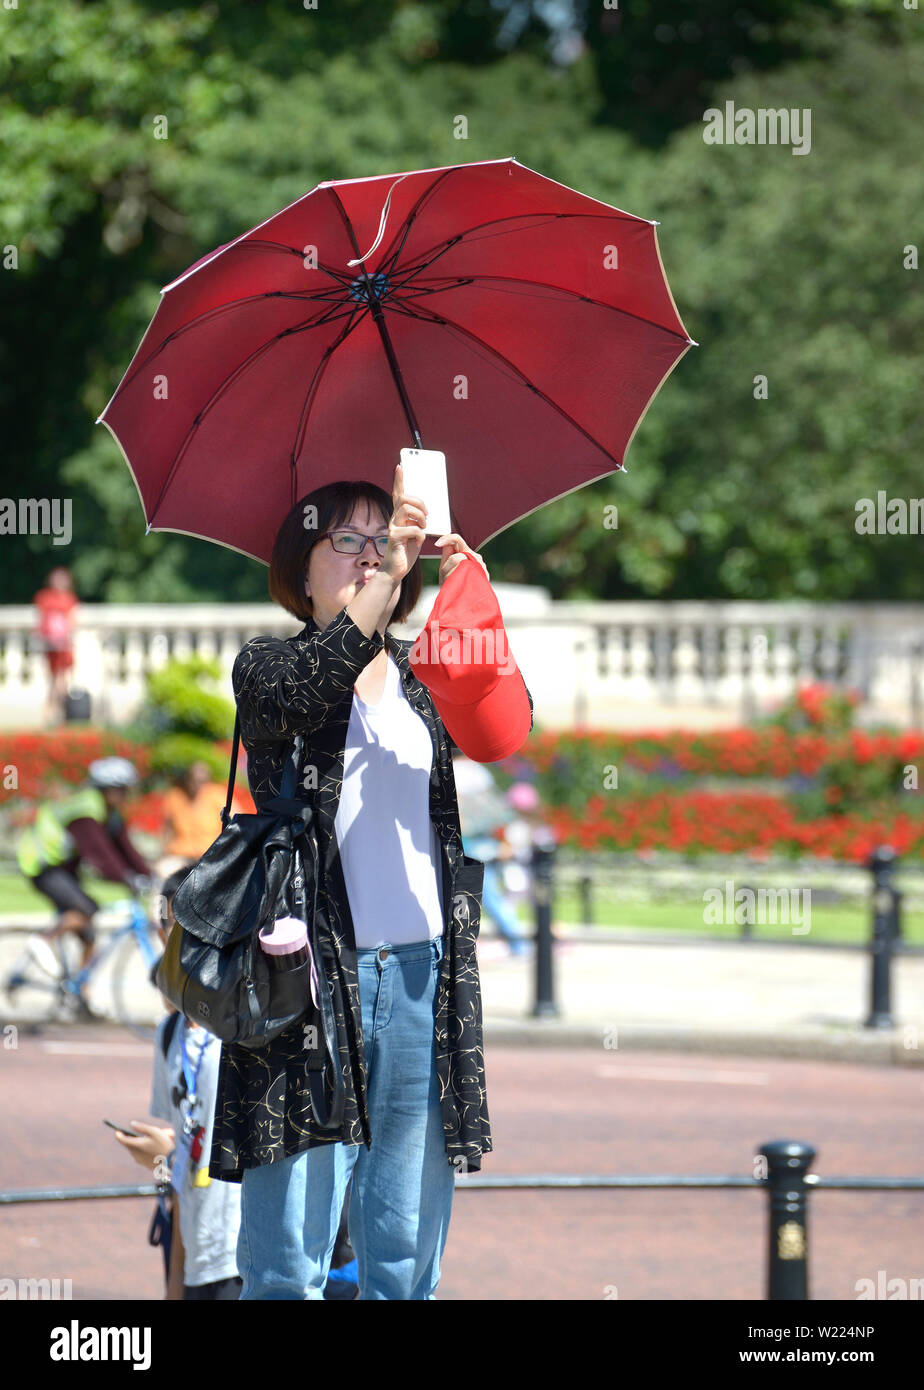 London, England, UK. Asian tourist with an umbrella on a hot sunny day taking a photo with her mobile phone Stock Photo